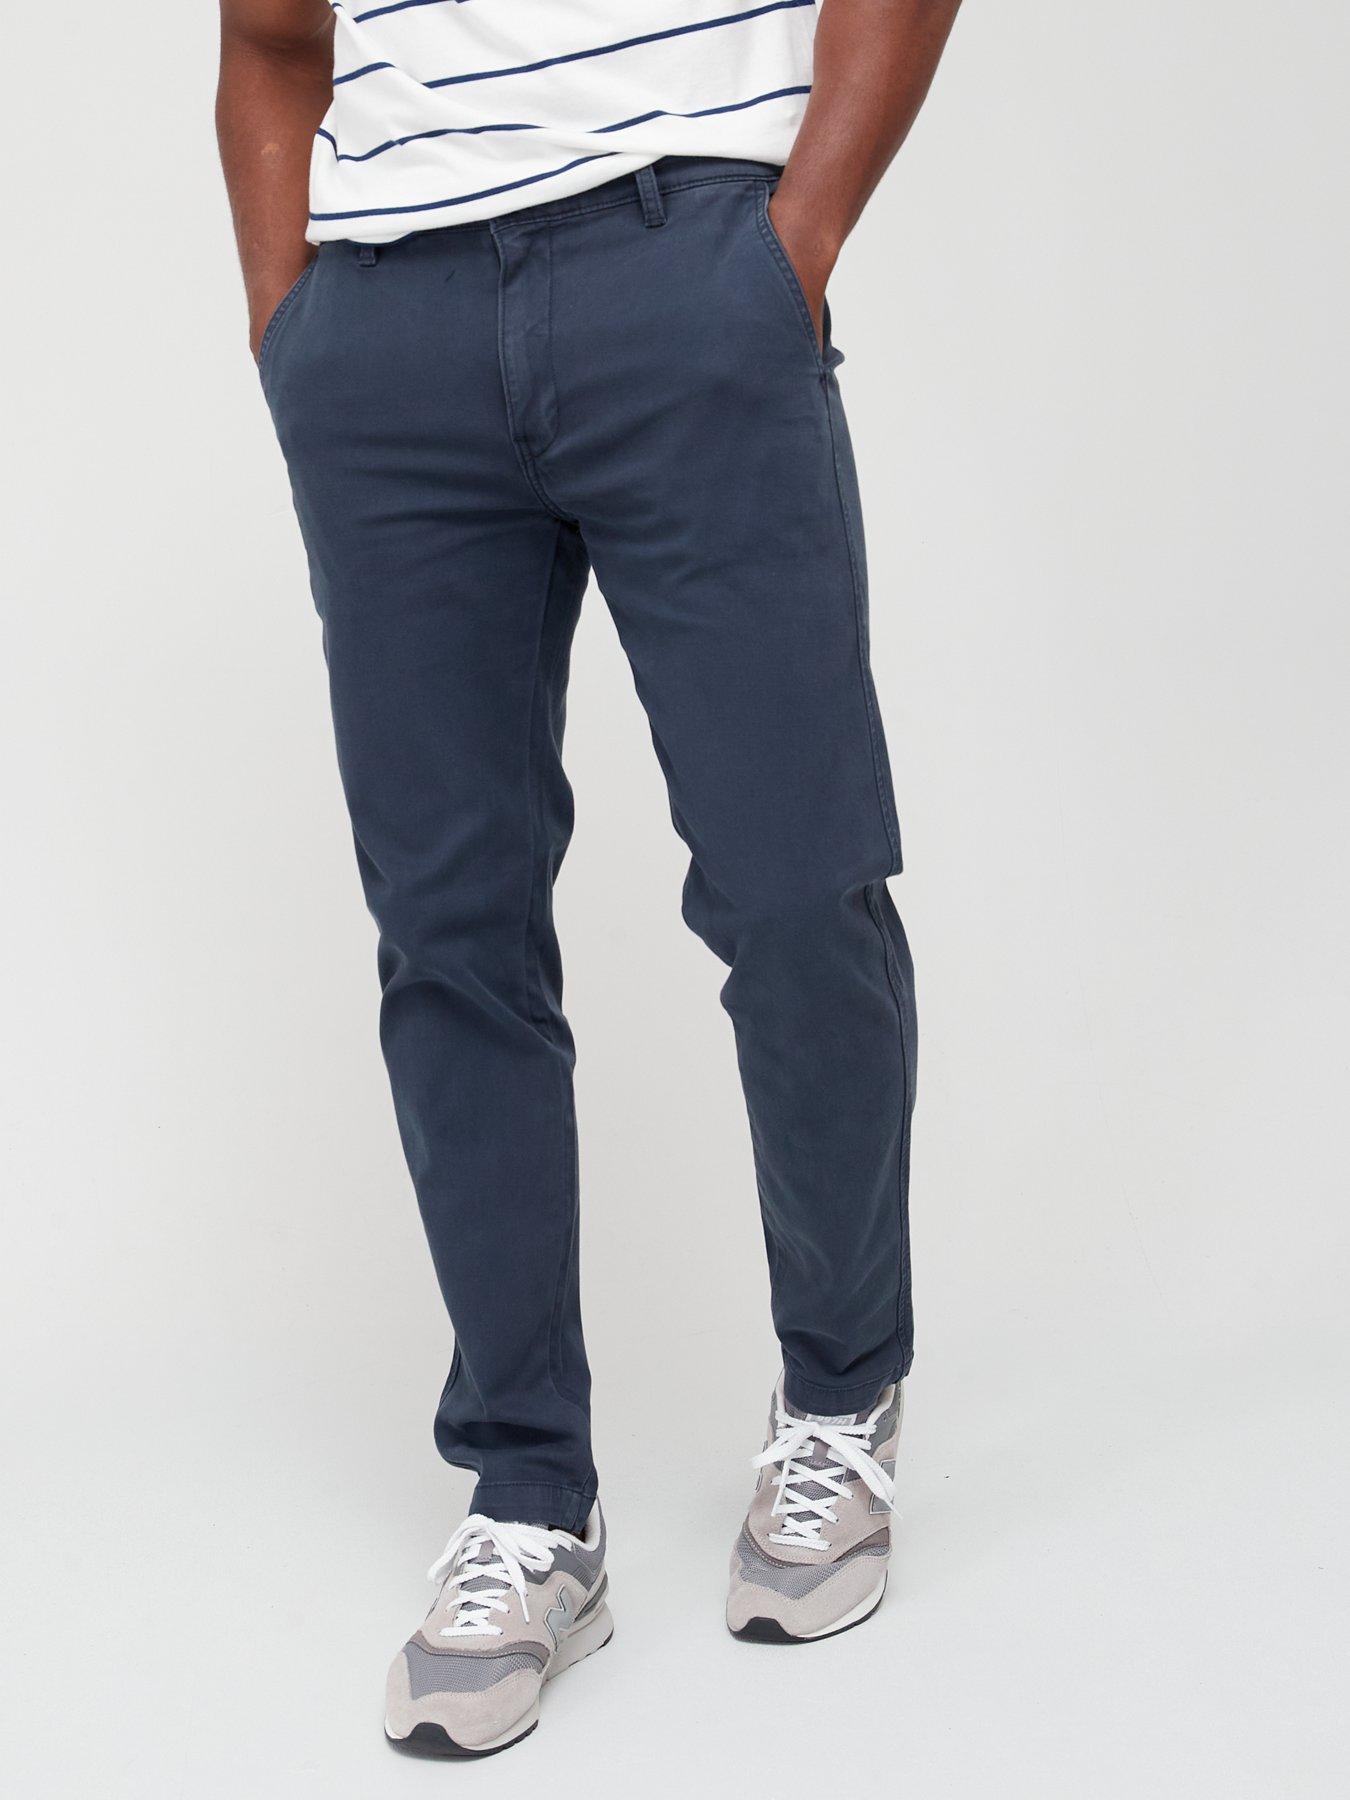 Levi's Slim Fit Chinos - Navy | very.co.uk